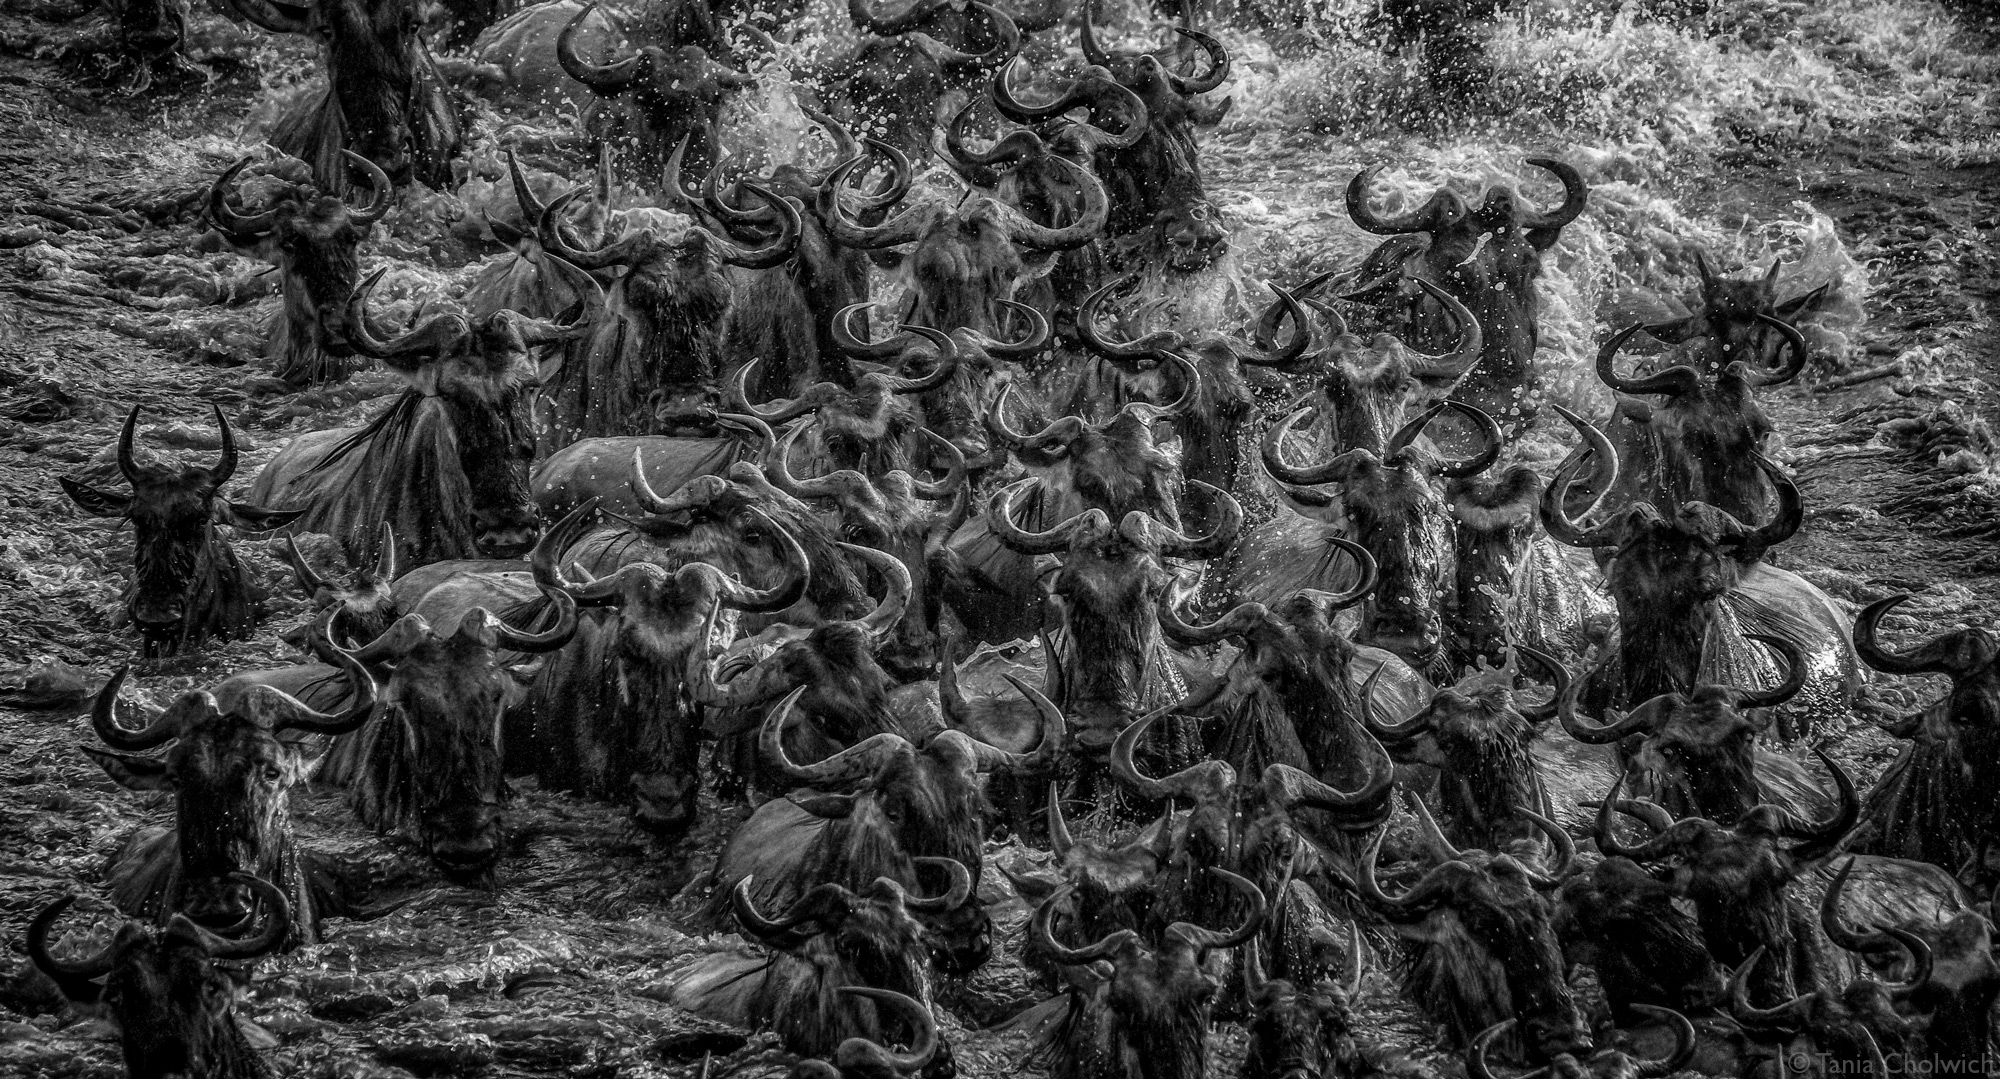 Wildbeest crossing the river in a large group during the Great Migration